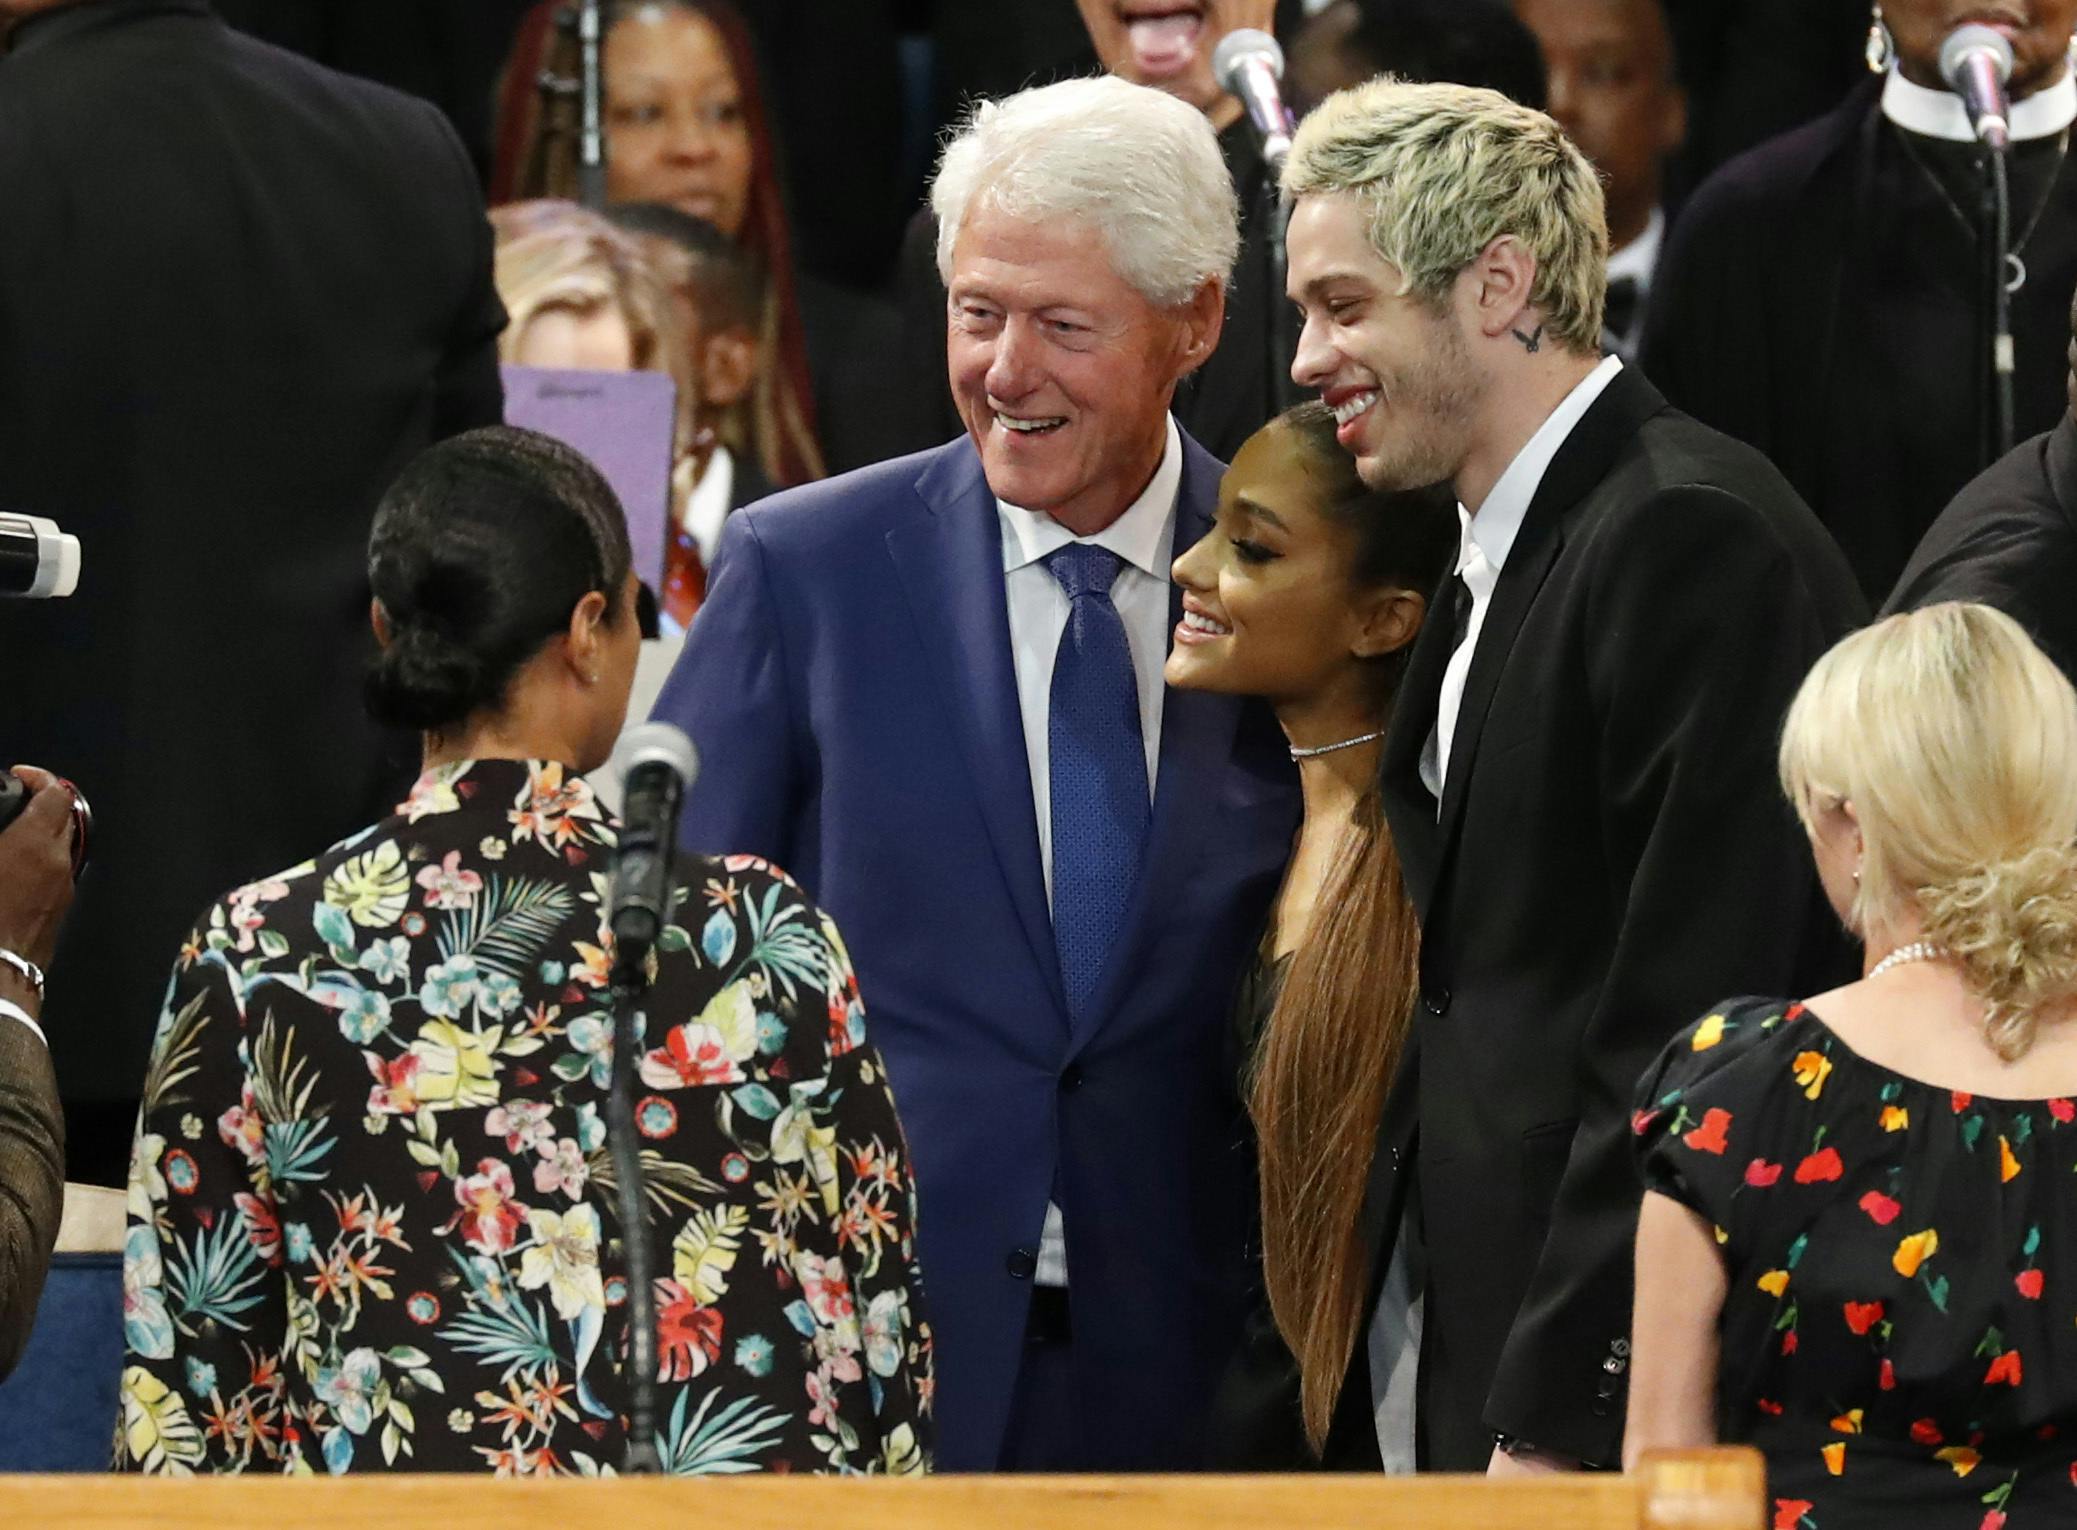 Former President Bill Clinton poses for a photo with Ariana Grande, center, and Pete Davidson, right, during the funeral service for Aretha Franklin at Greater Grace Temple, Friday, Aug. 31, 2018, in Detroit. Franklin died Aug. 16, 2018 of pancreatic cancer at the age of 76. (AP Photo/Paul Sancya)